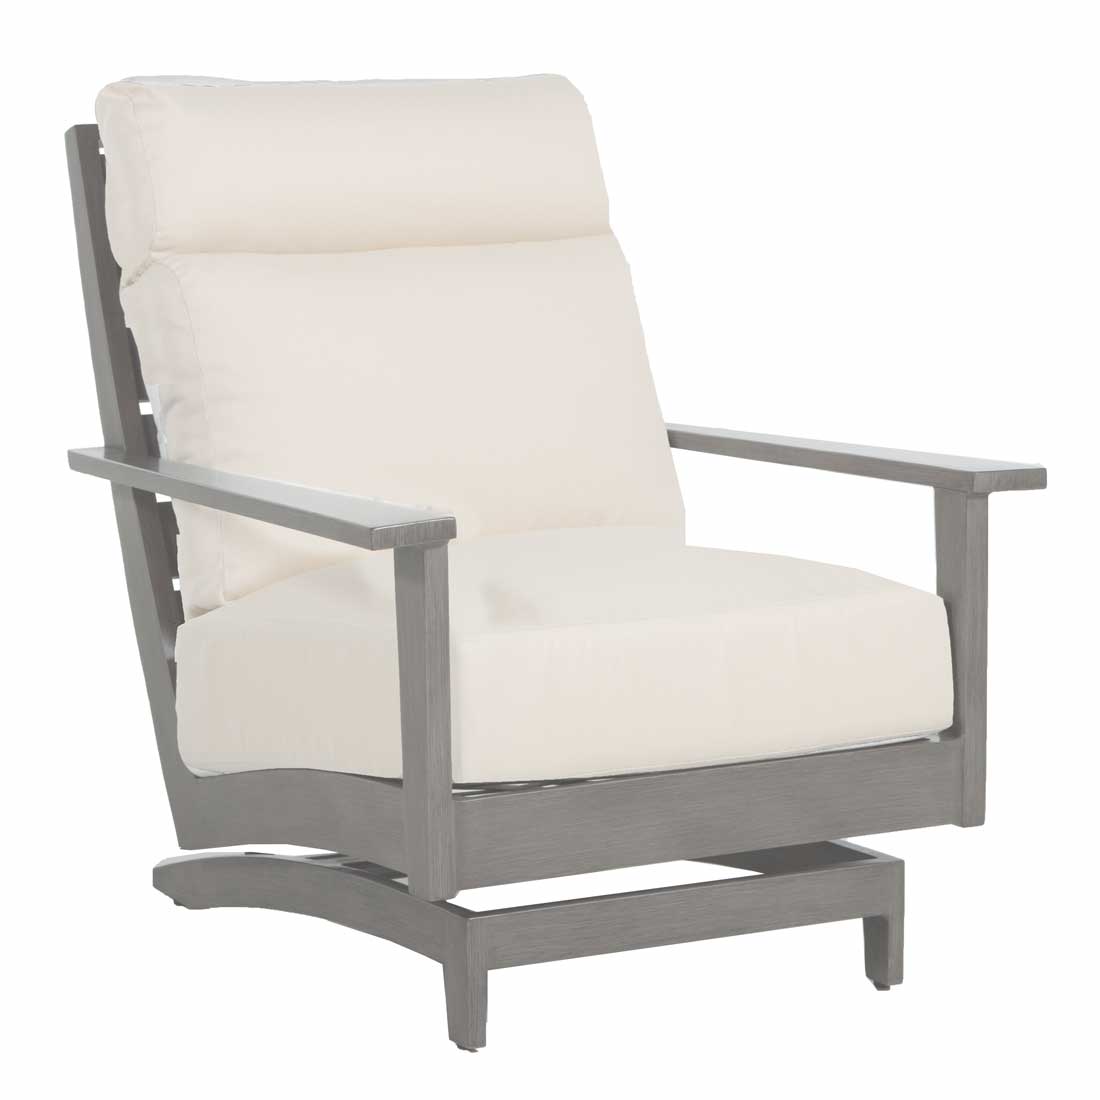 KENNEBUNKPORT ALUMINUM SPRING LOUNGE CHAIR